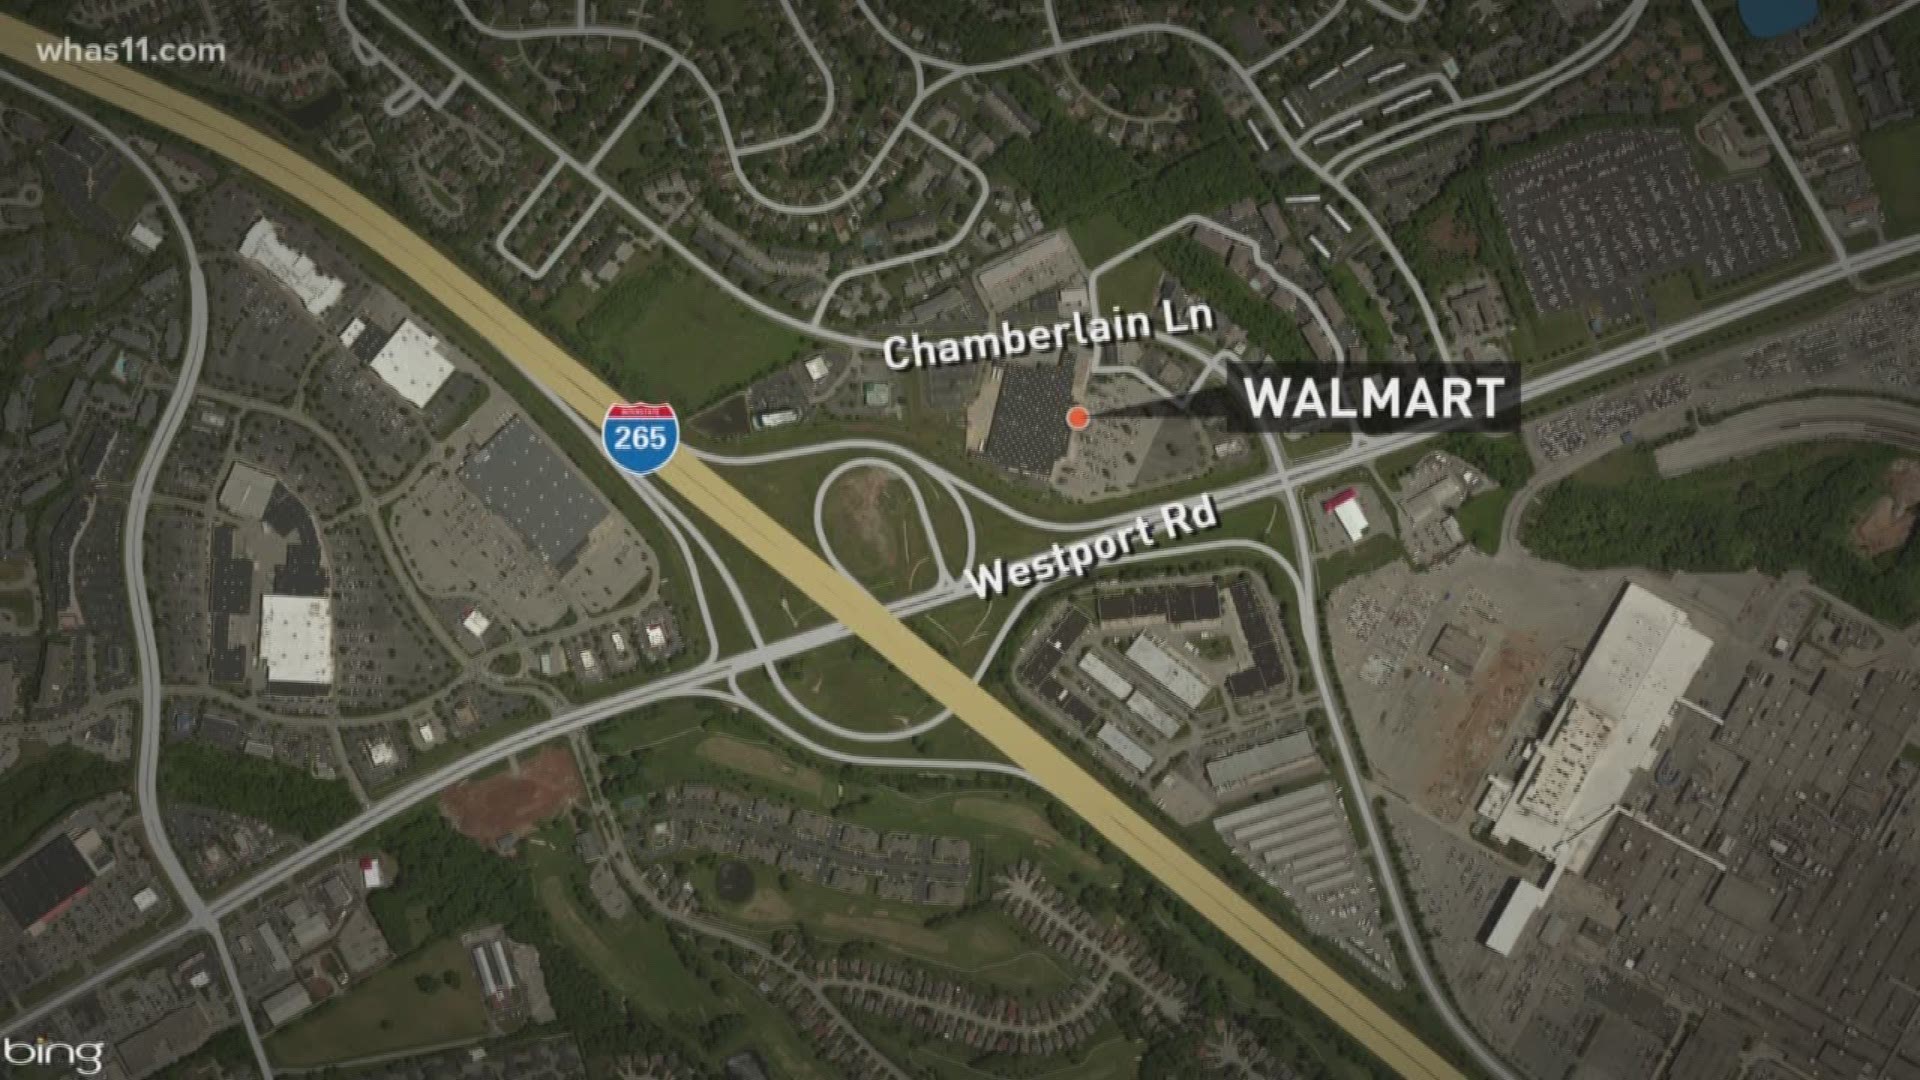 Louisville Metro Police investigating an initial 'active aggressor' call at the Walmart at Westport Road near I-265.We heard from many of you about this and looked into it.